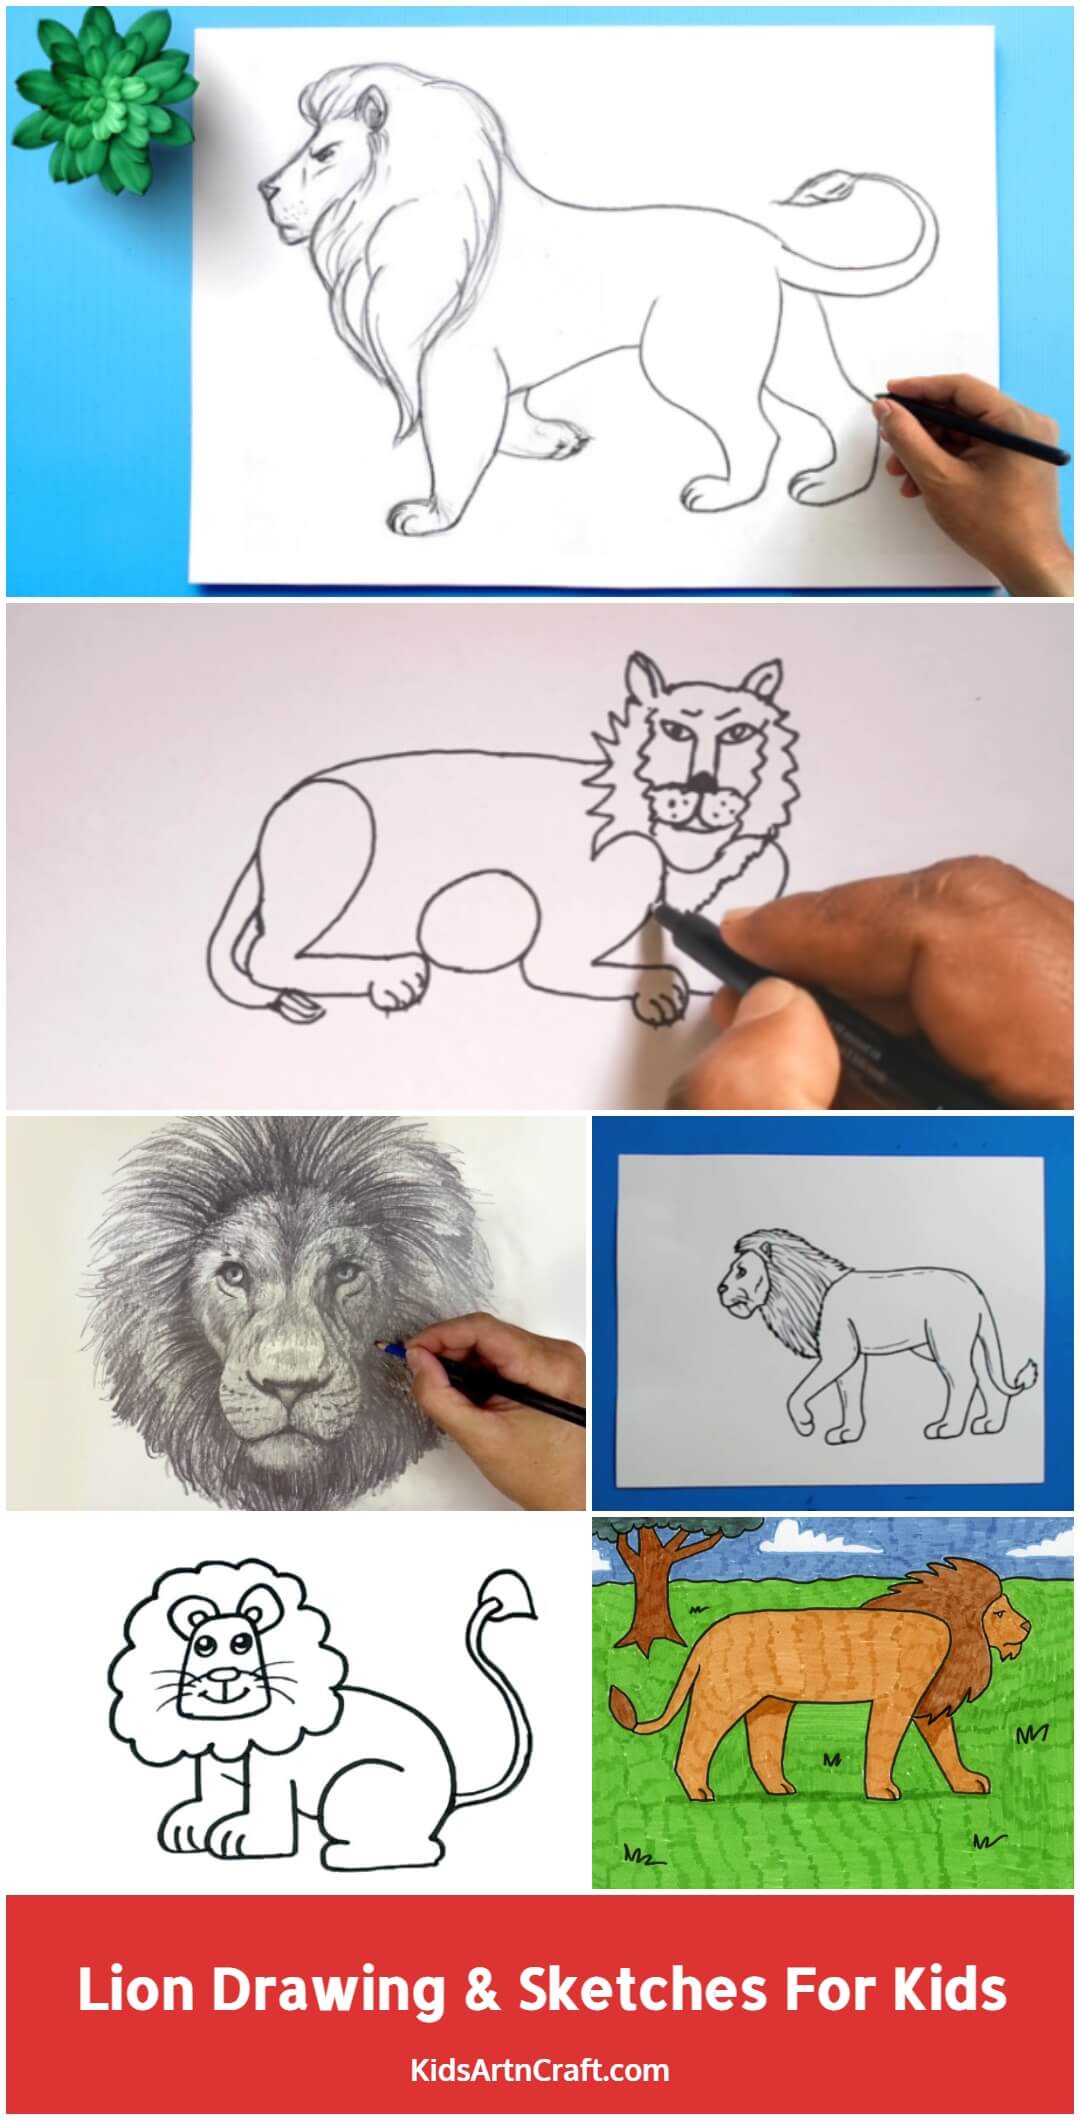 Lion Drawing & Sketches for Kids - Kids Art & Craft